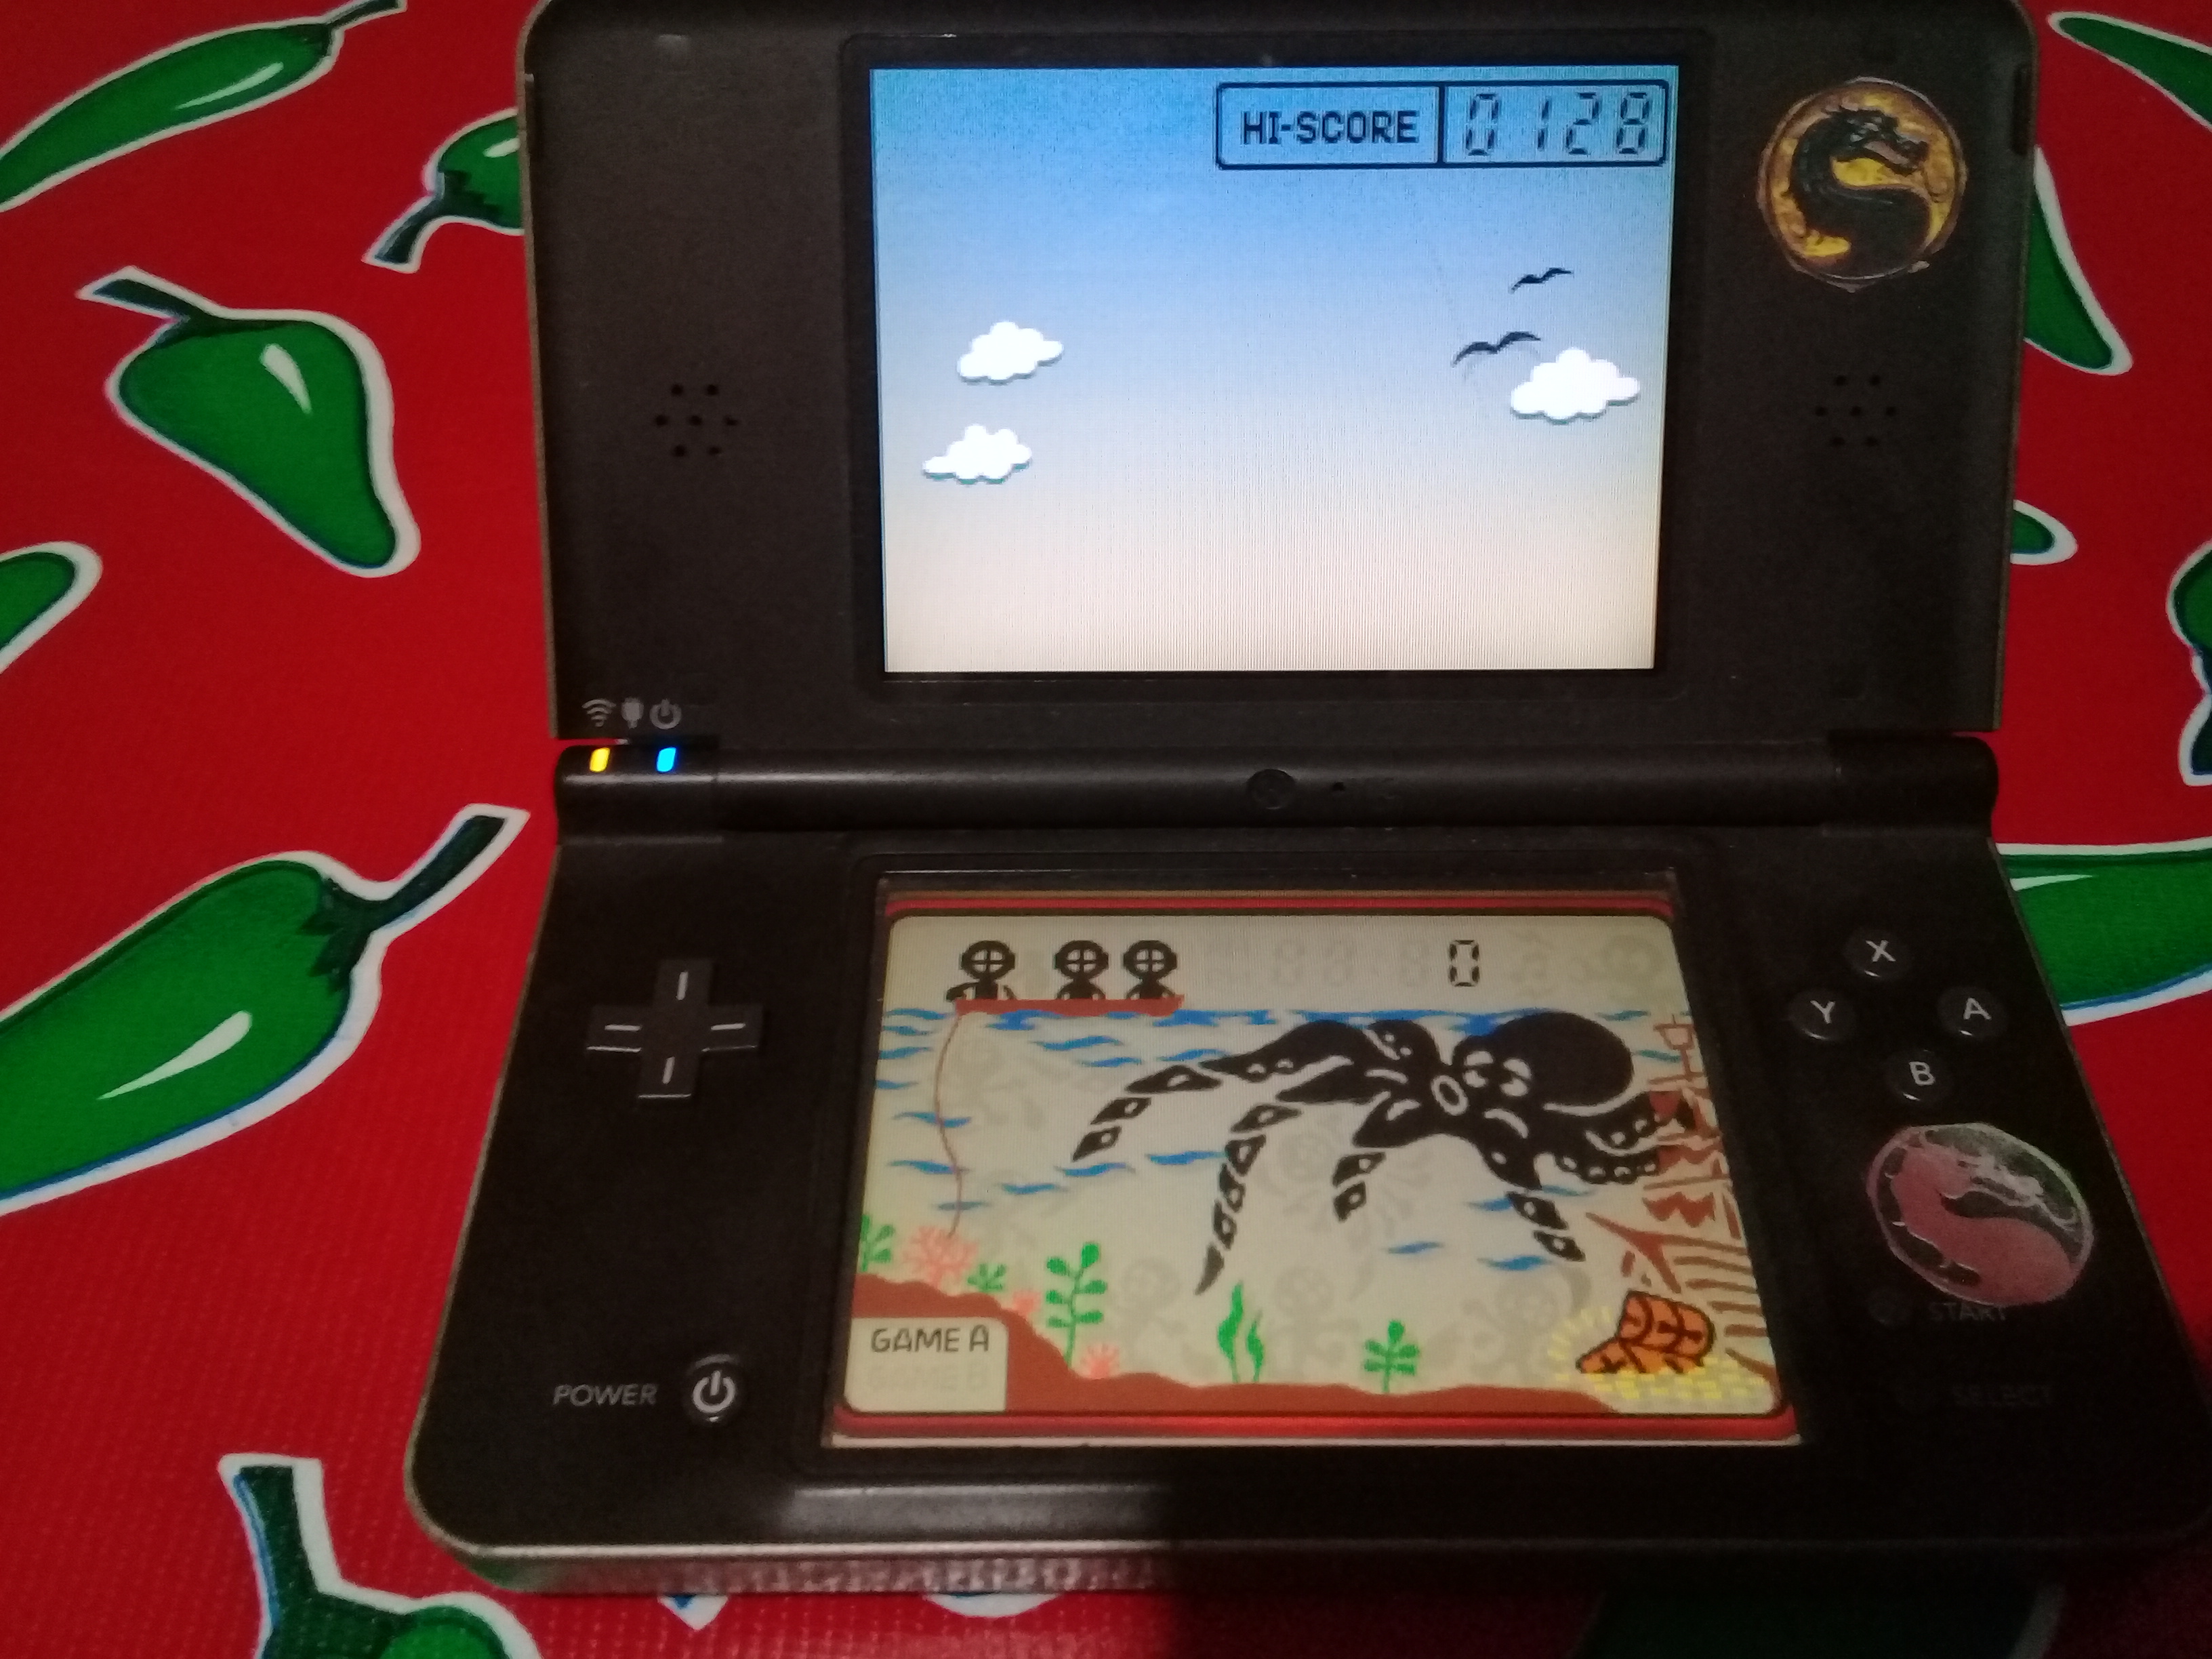 omargeddon: Game & Watch Collection 2: Octopus [Game A] (Nintendo DS) 128 points on 2021-09-23 19:30:51